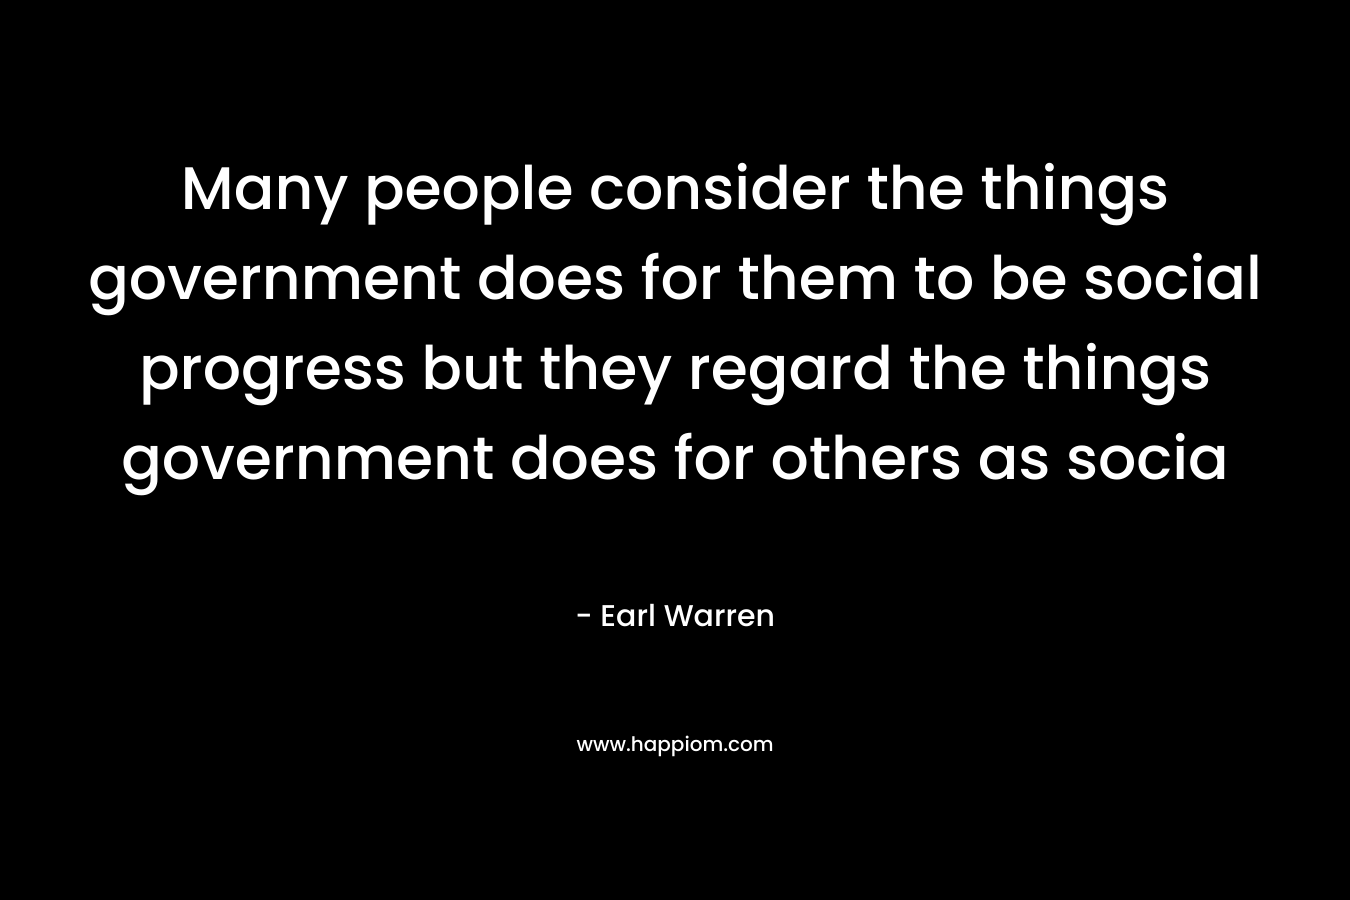 Many people consider the things government does for them to be social progress but they regard the things government does for others as socia – Earl Warren